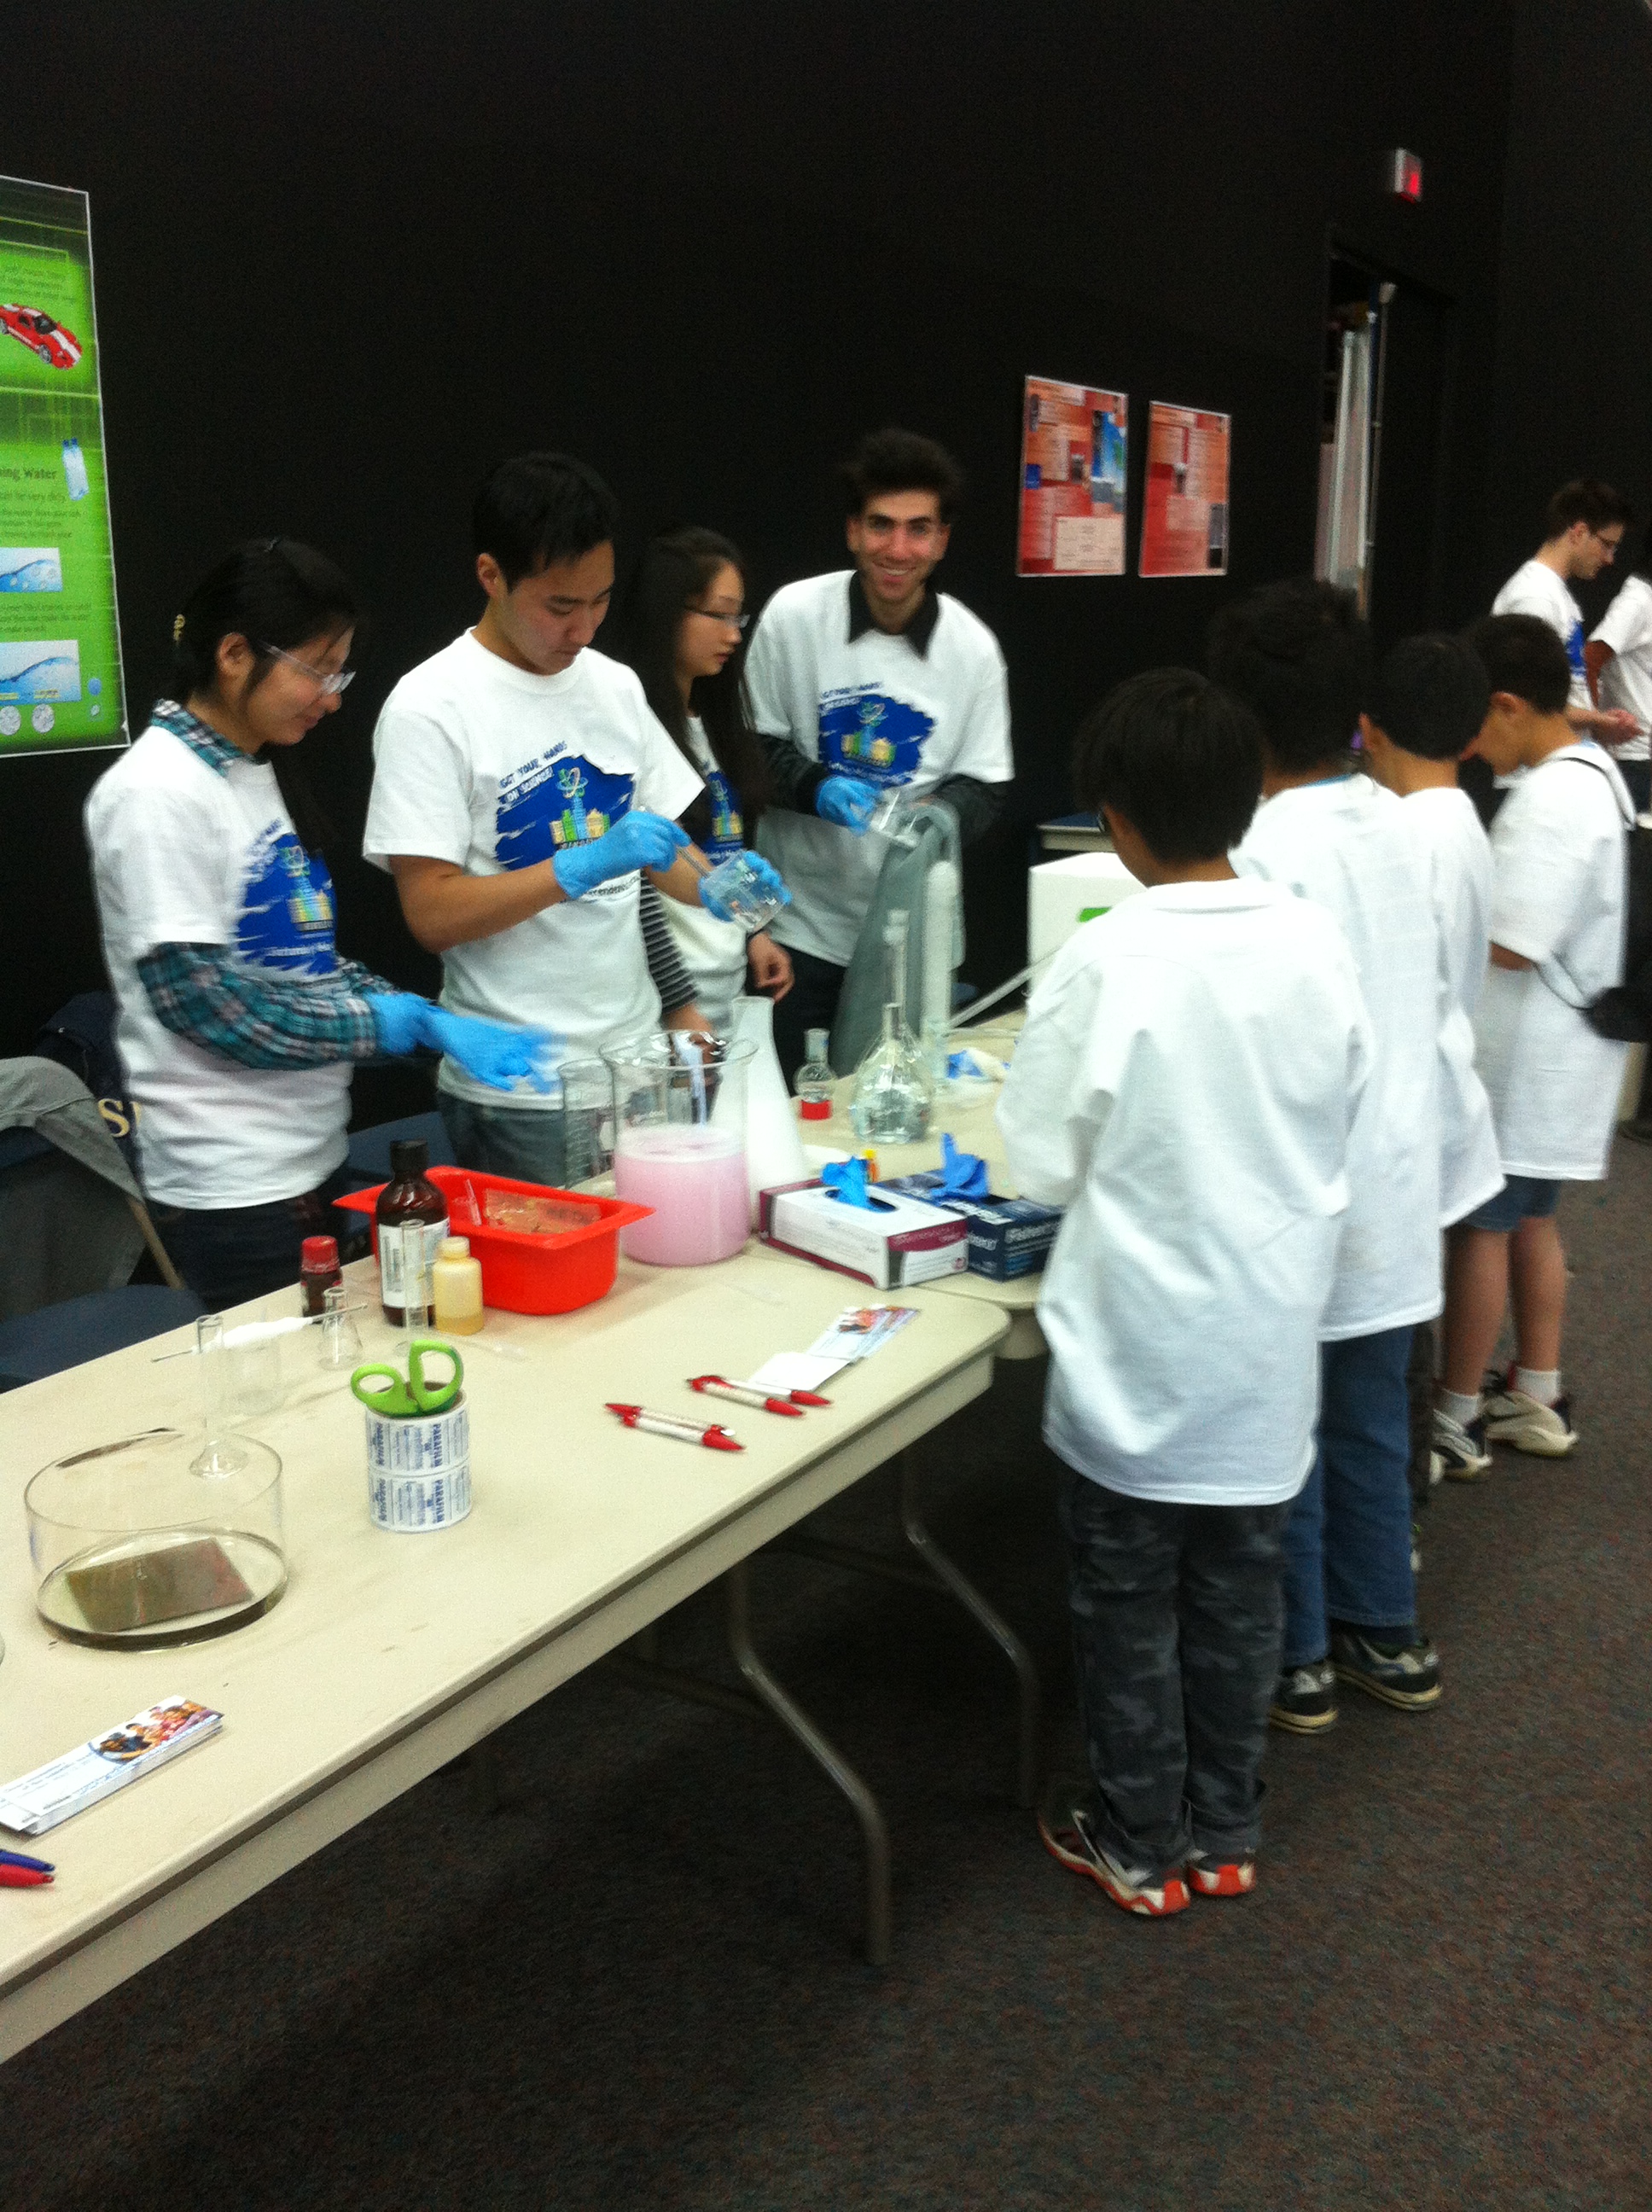 Members of the Dr. Serpe research group show polymer demos at Science Rendezvous